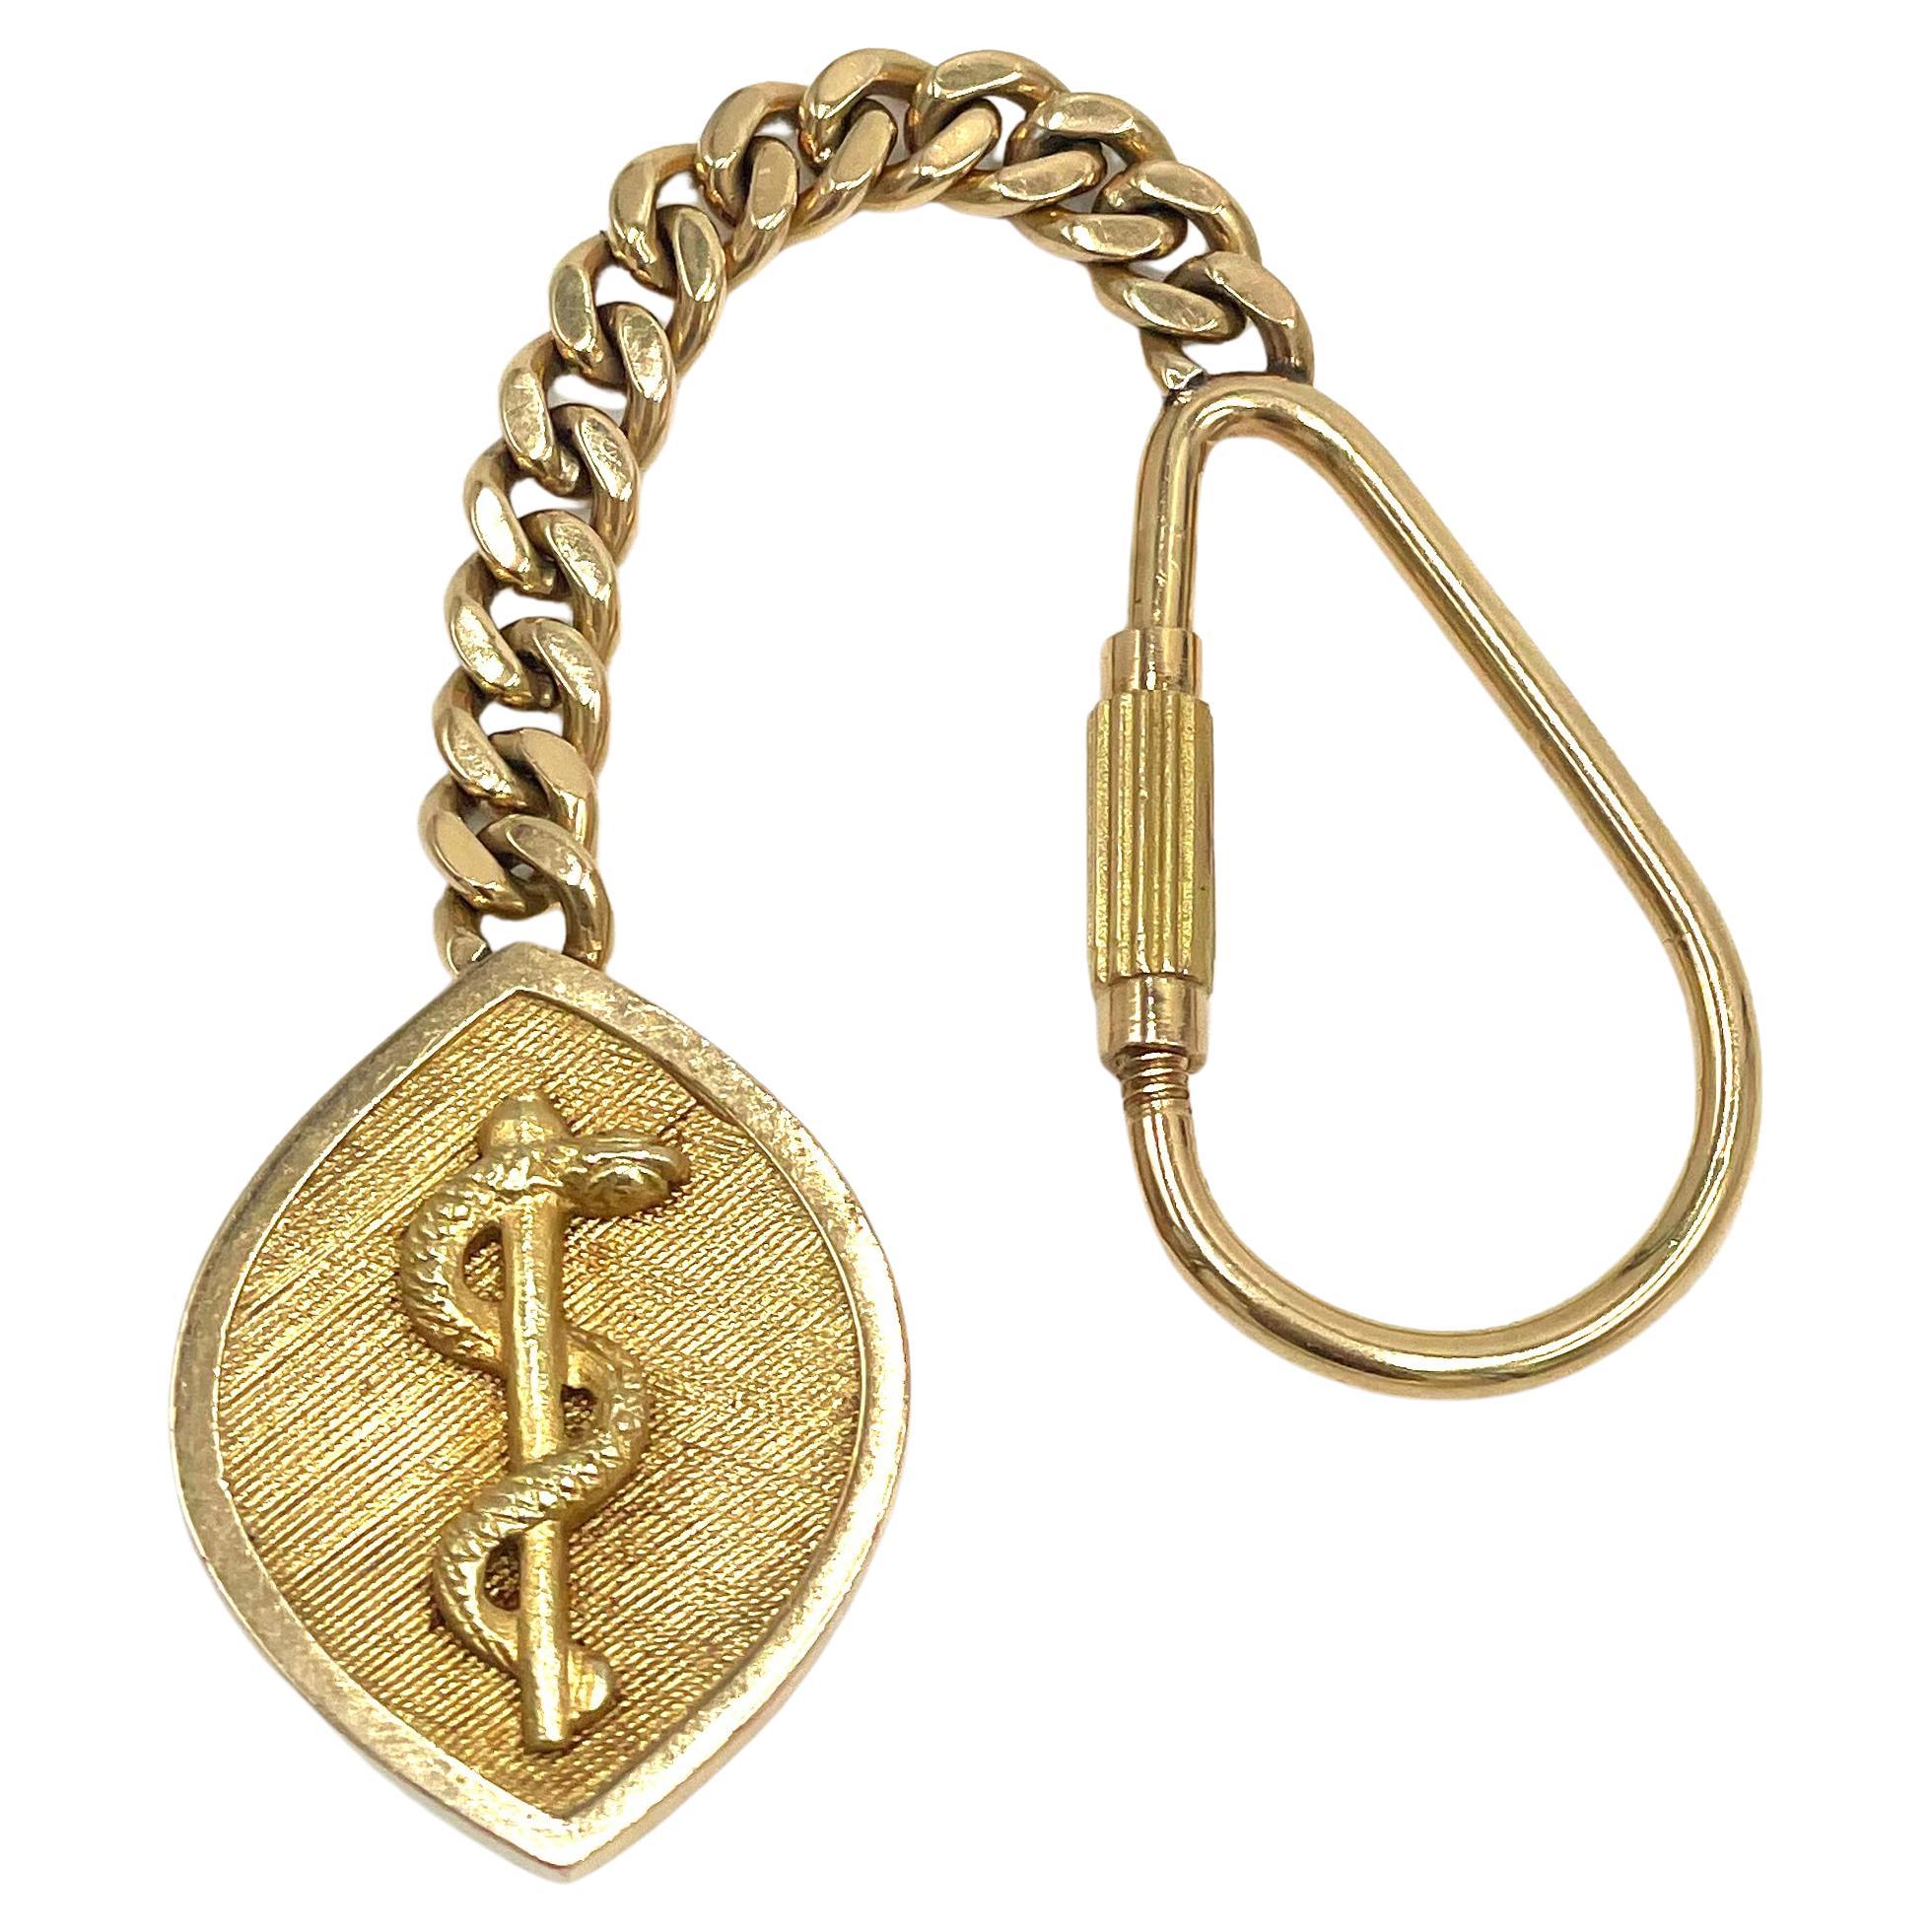 14K Yellow Gold Key Chain with the Rod of Asclepius.